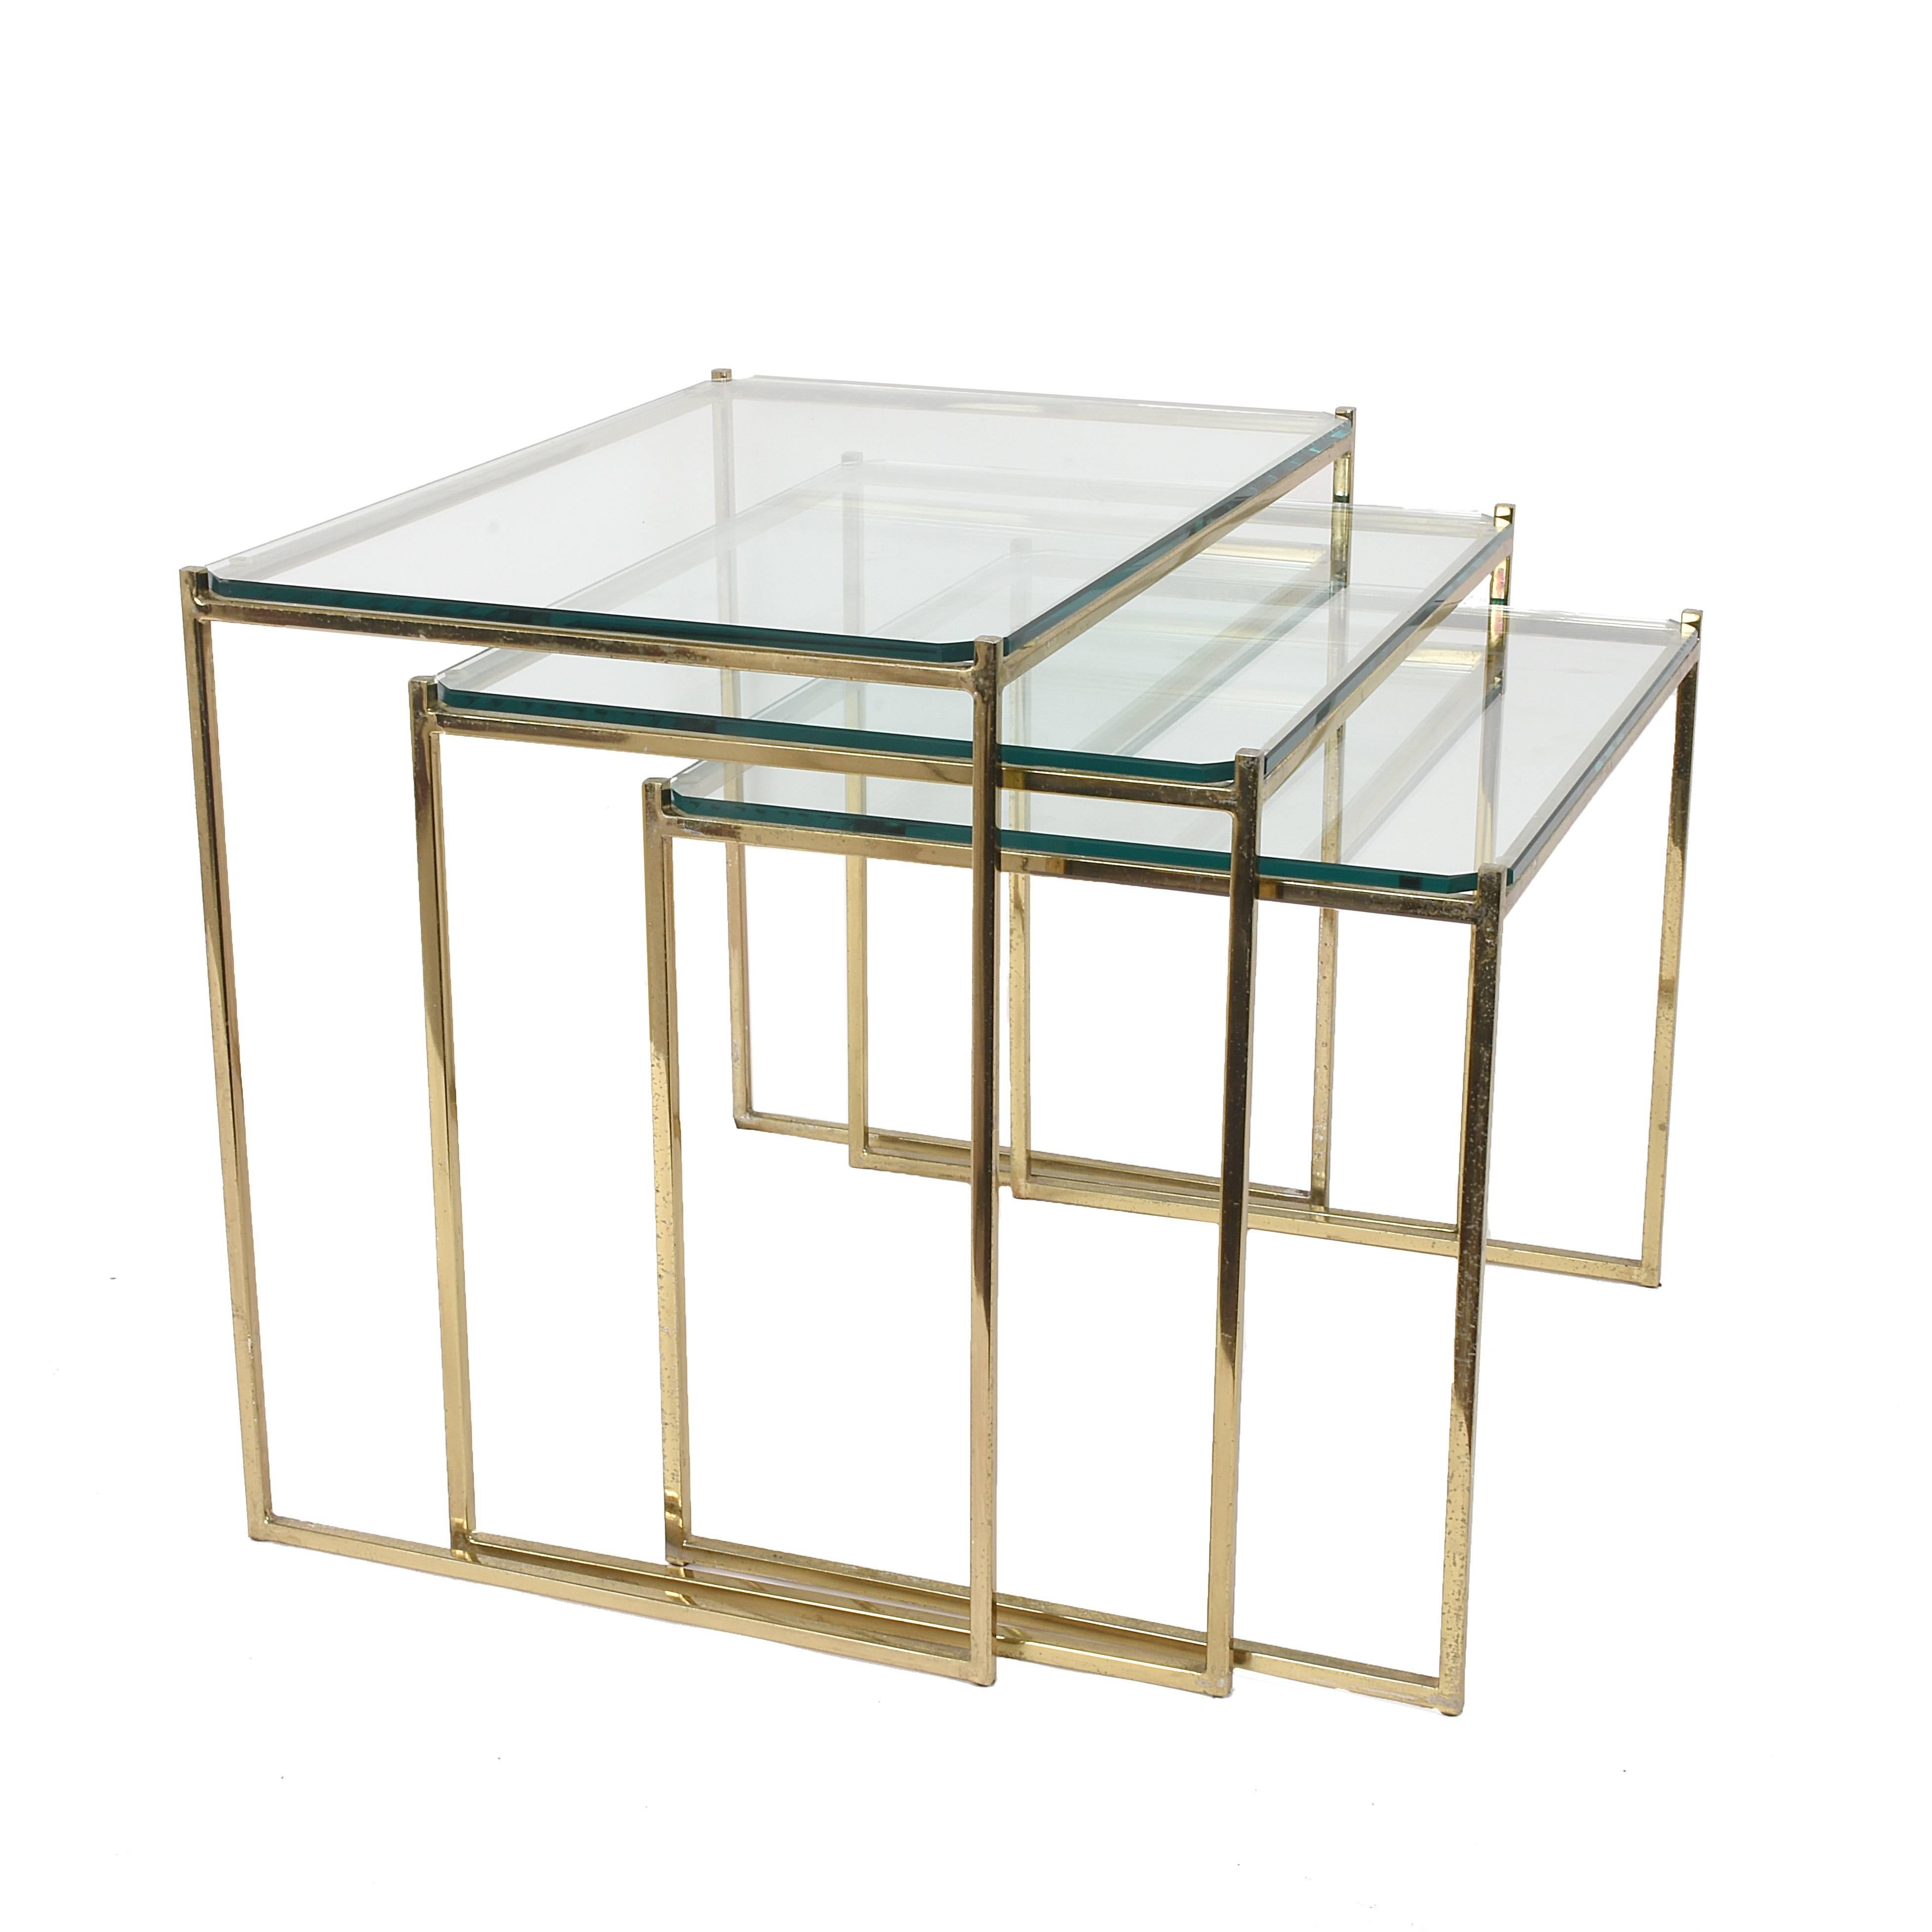 Nesting tables in brass and crystal Italy 1970s Mid-Century Modern 
Dimensions; Width 14.56, depth 21.25, height 18.11
Dimensions; Width 14.56, depth 16,14, height 16.33
Dimensions; Width 14.56, depth 18.30, height 14.37.